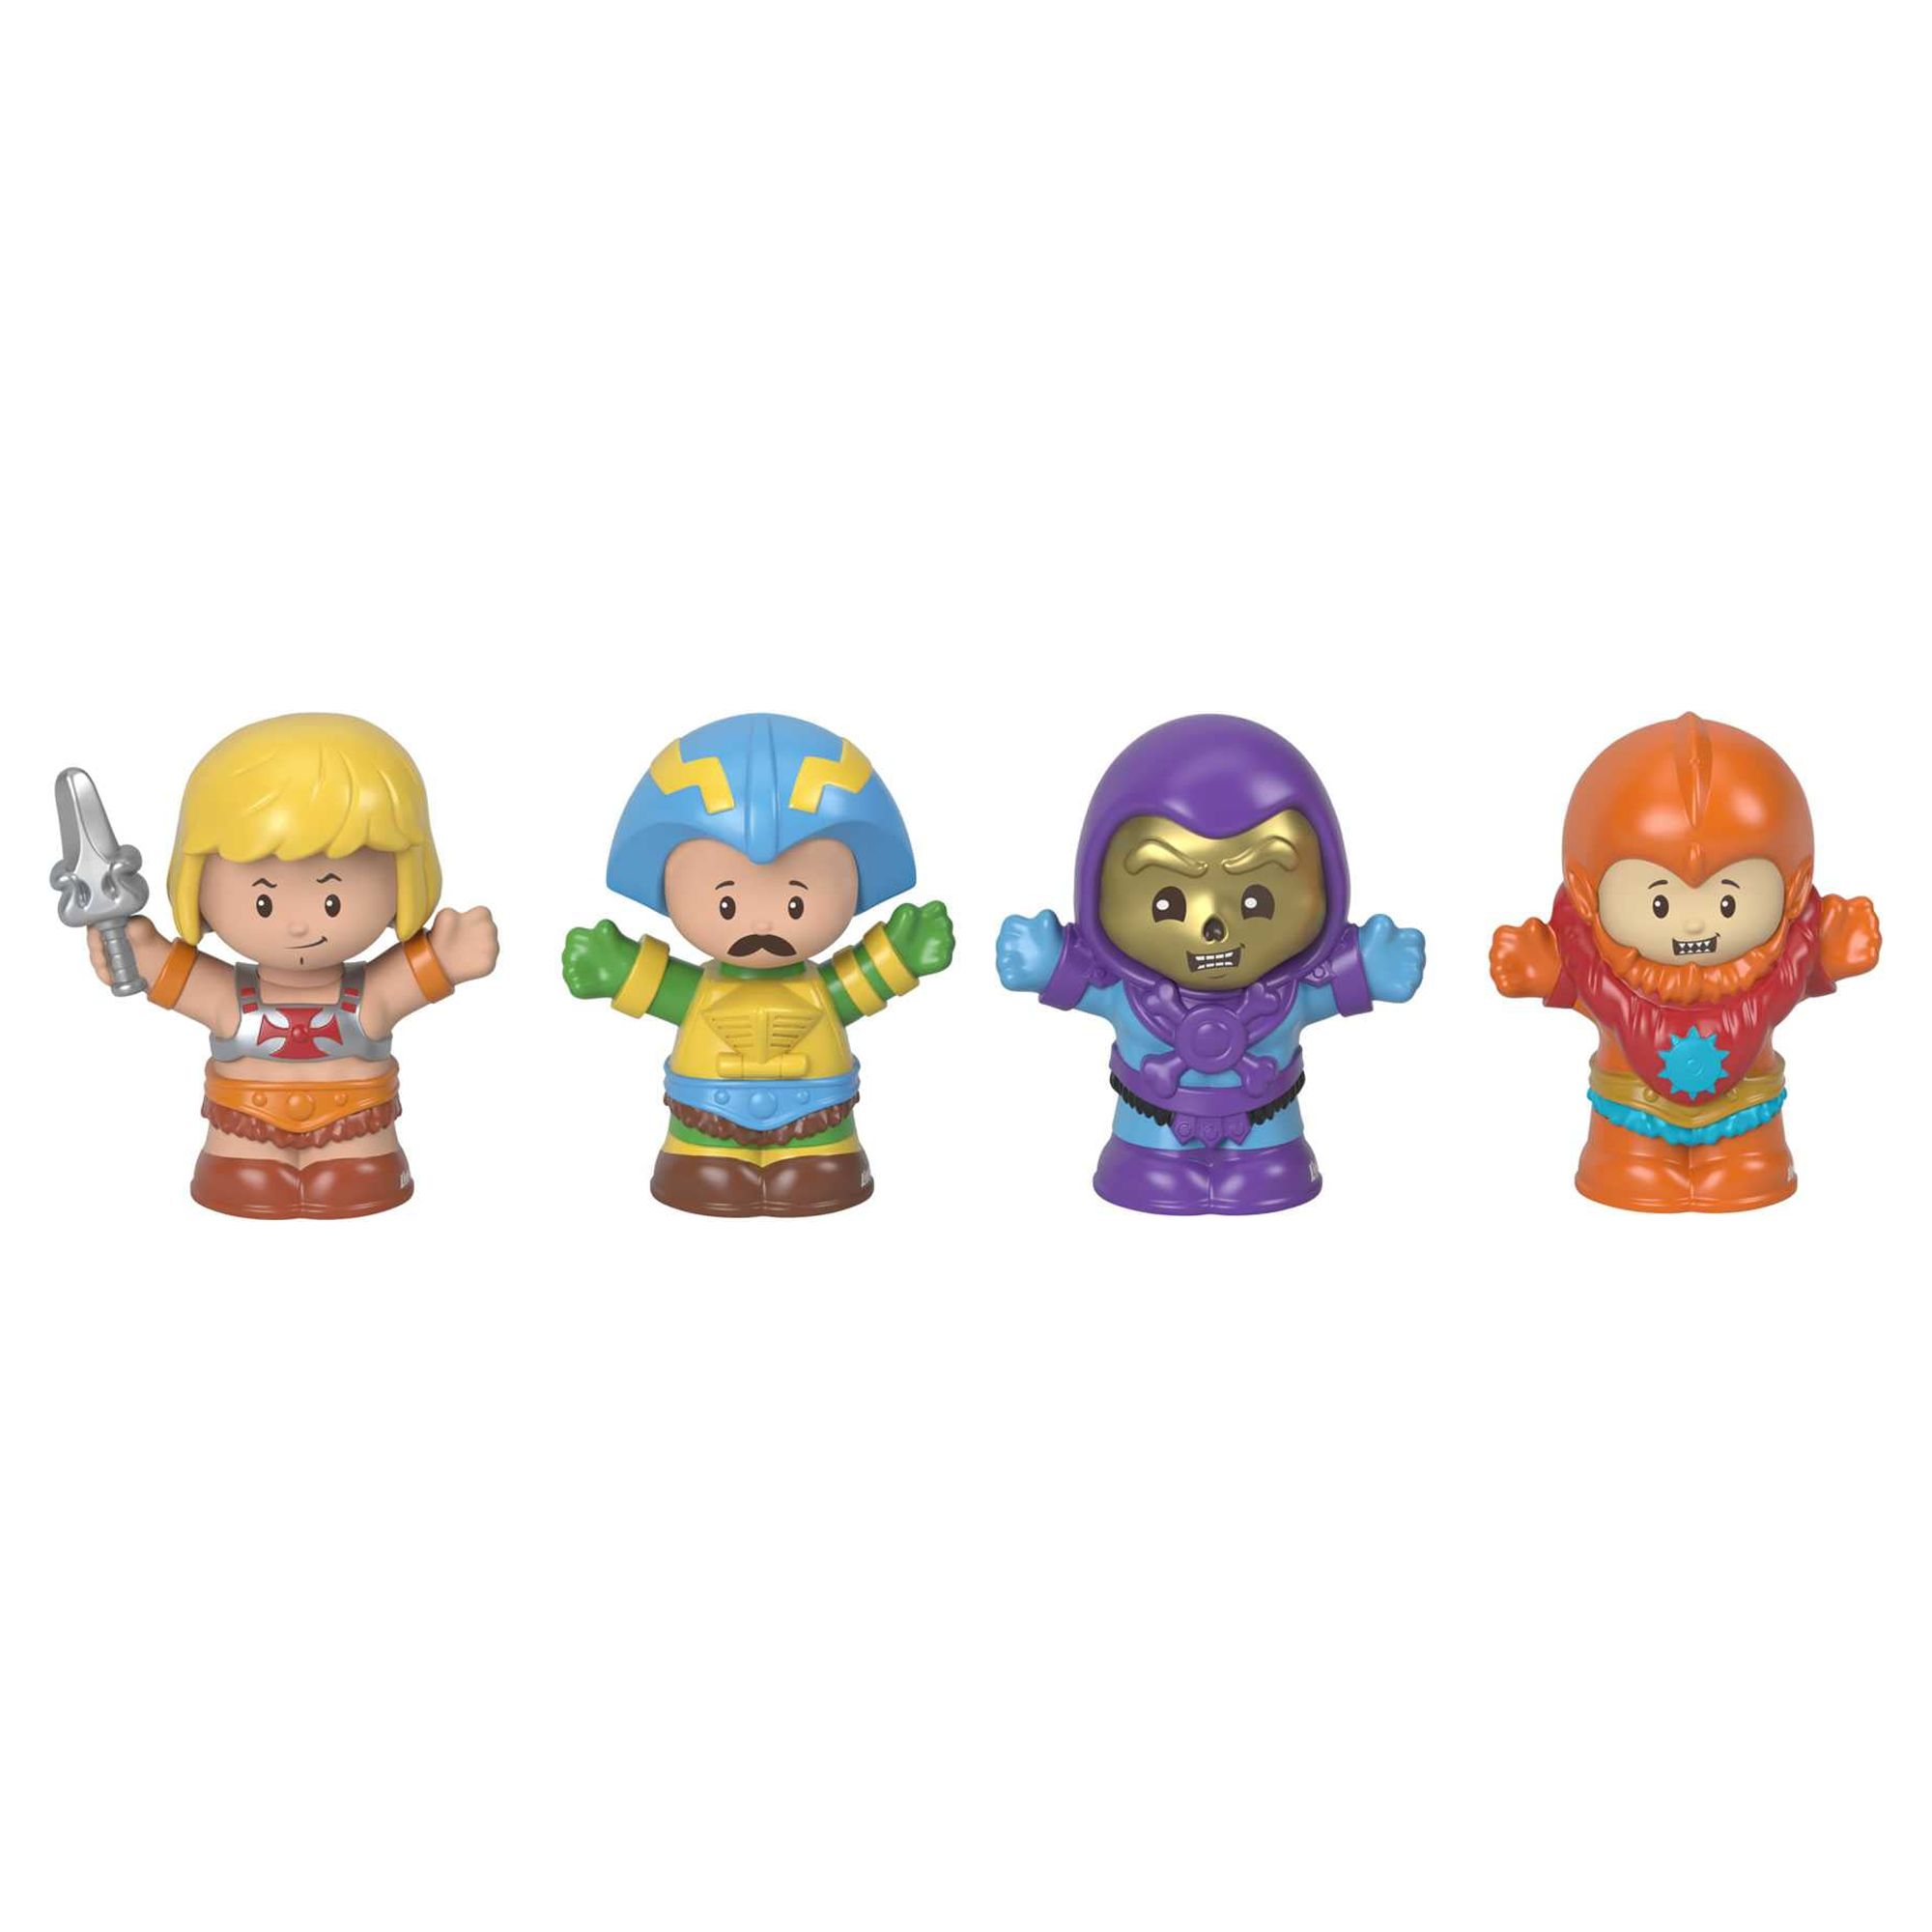 Little People Collector Masters of the Universe Special Edition Set for Adults & Fans, 4 Figures - image 2 of 5